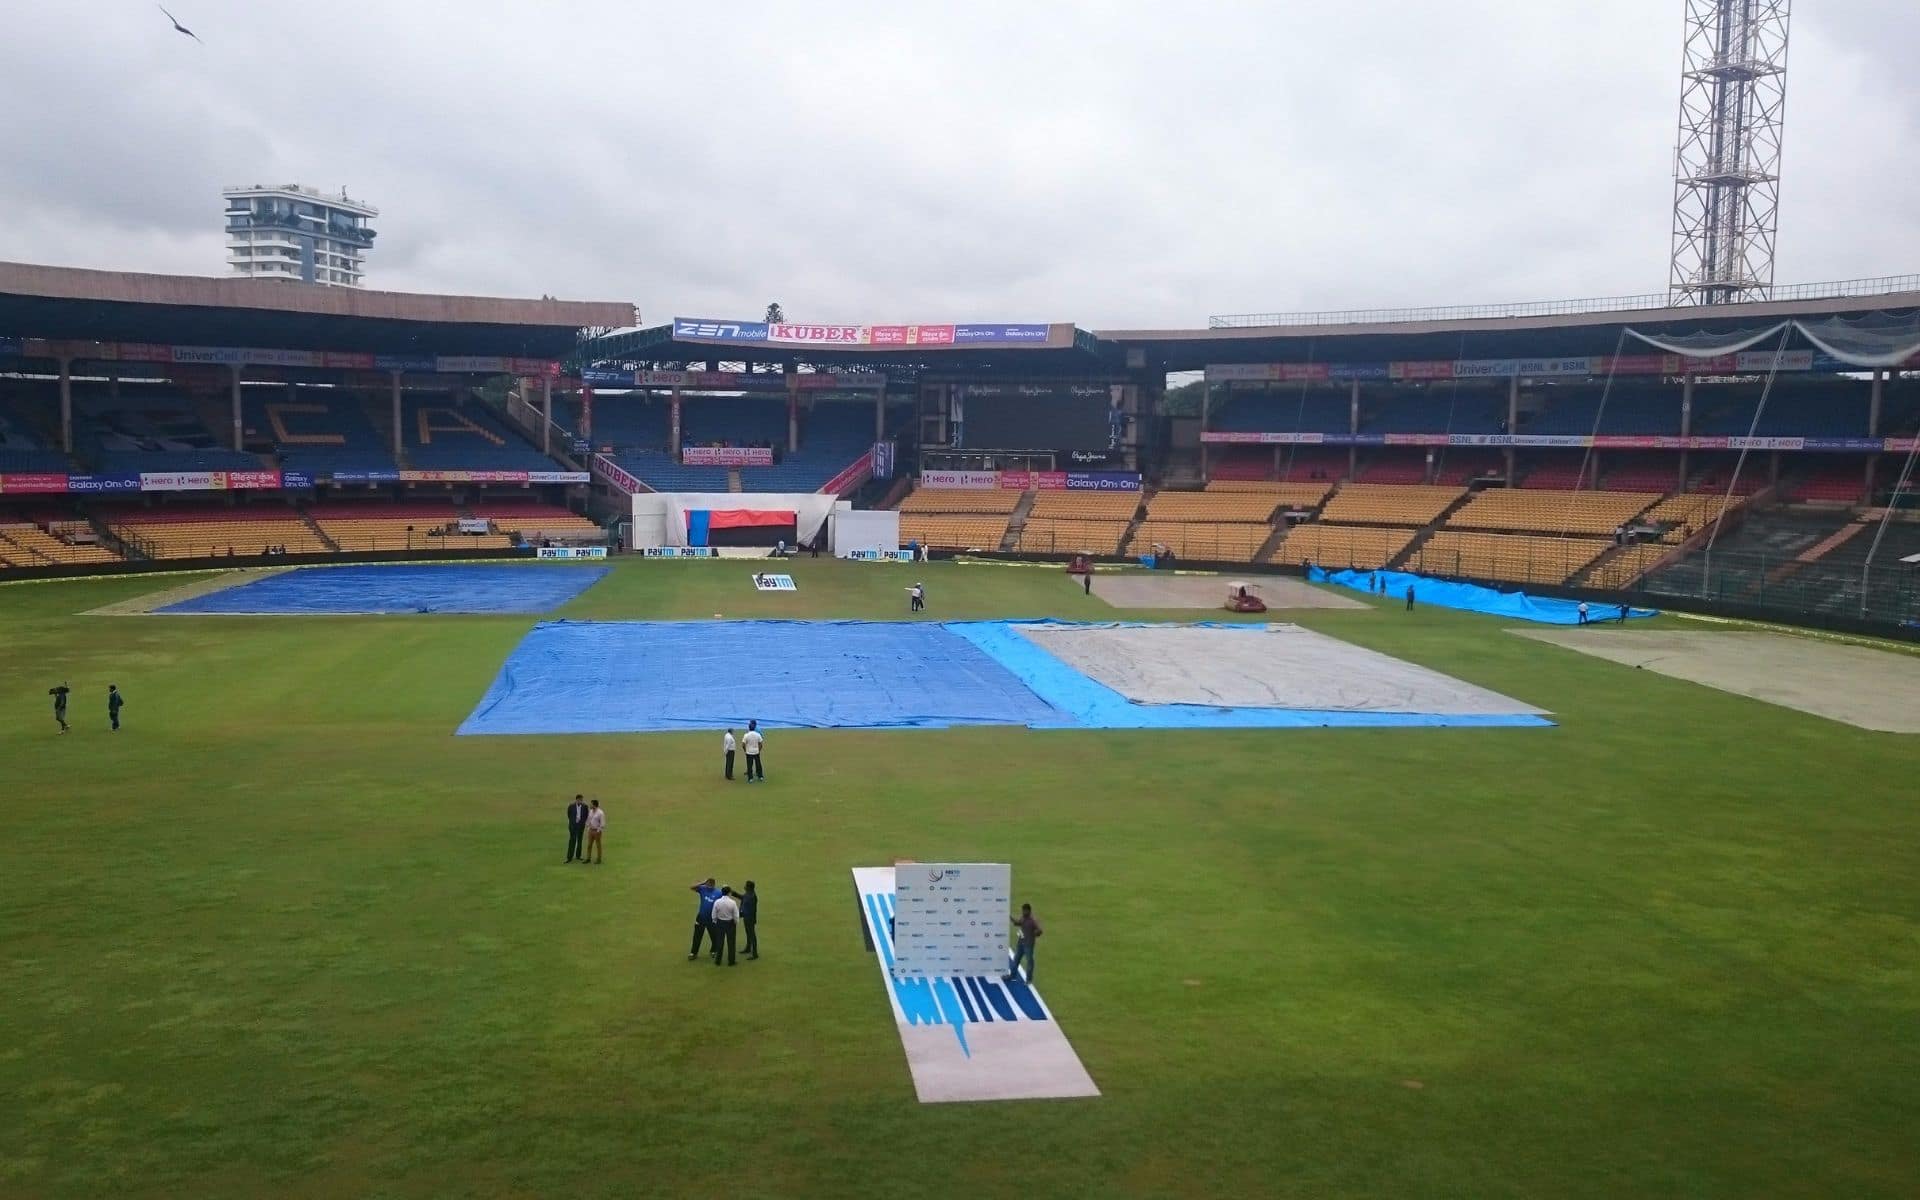 M Chinnaswamy Stadium has quite a number of records to its name [X.com]